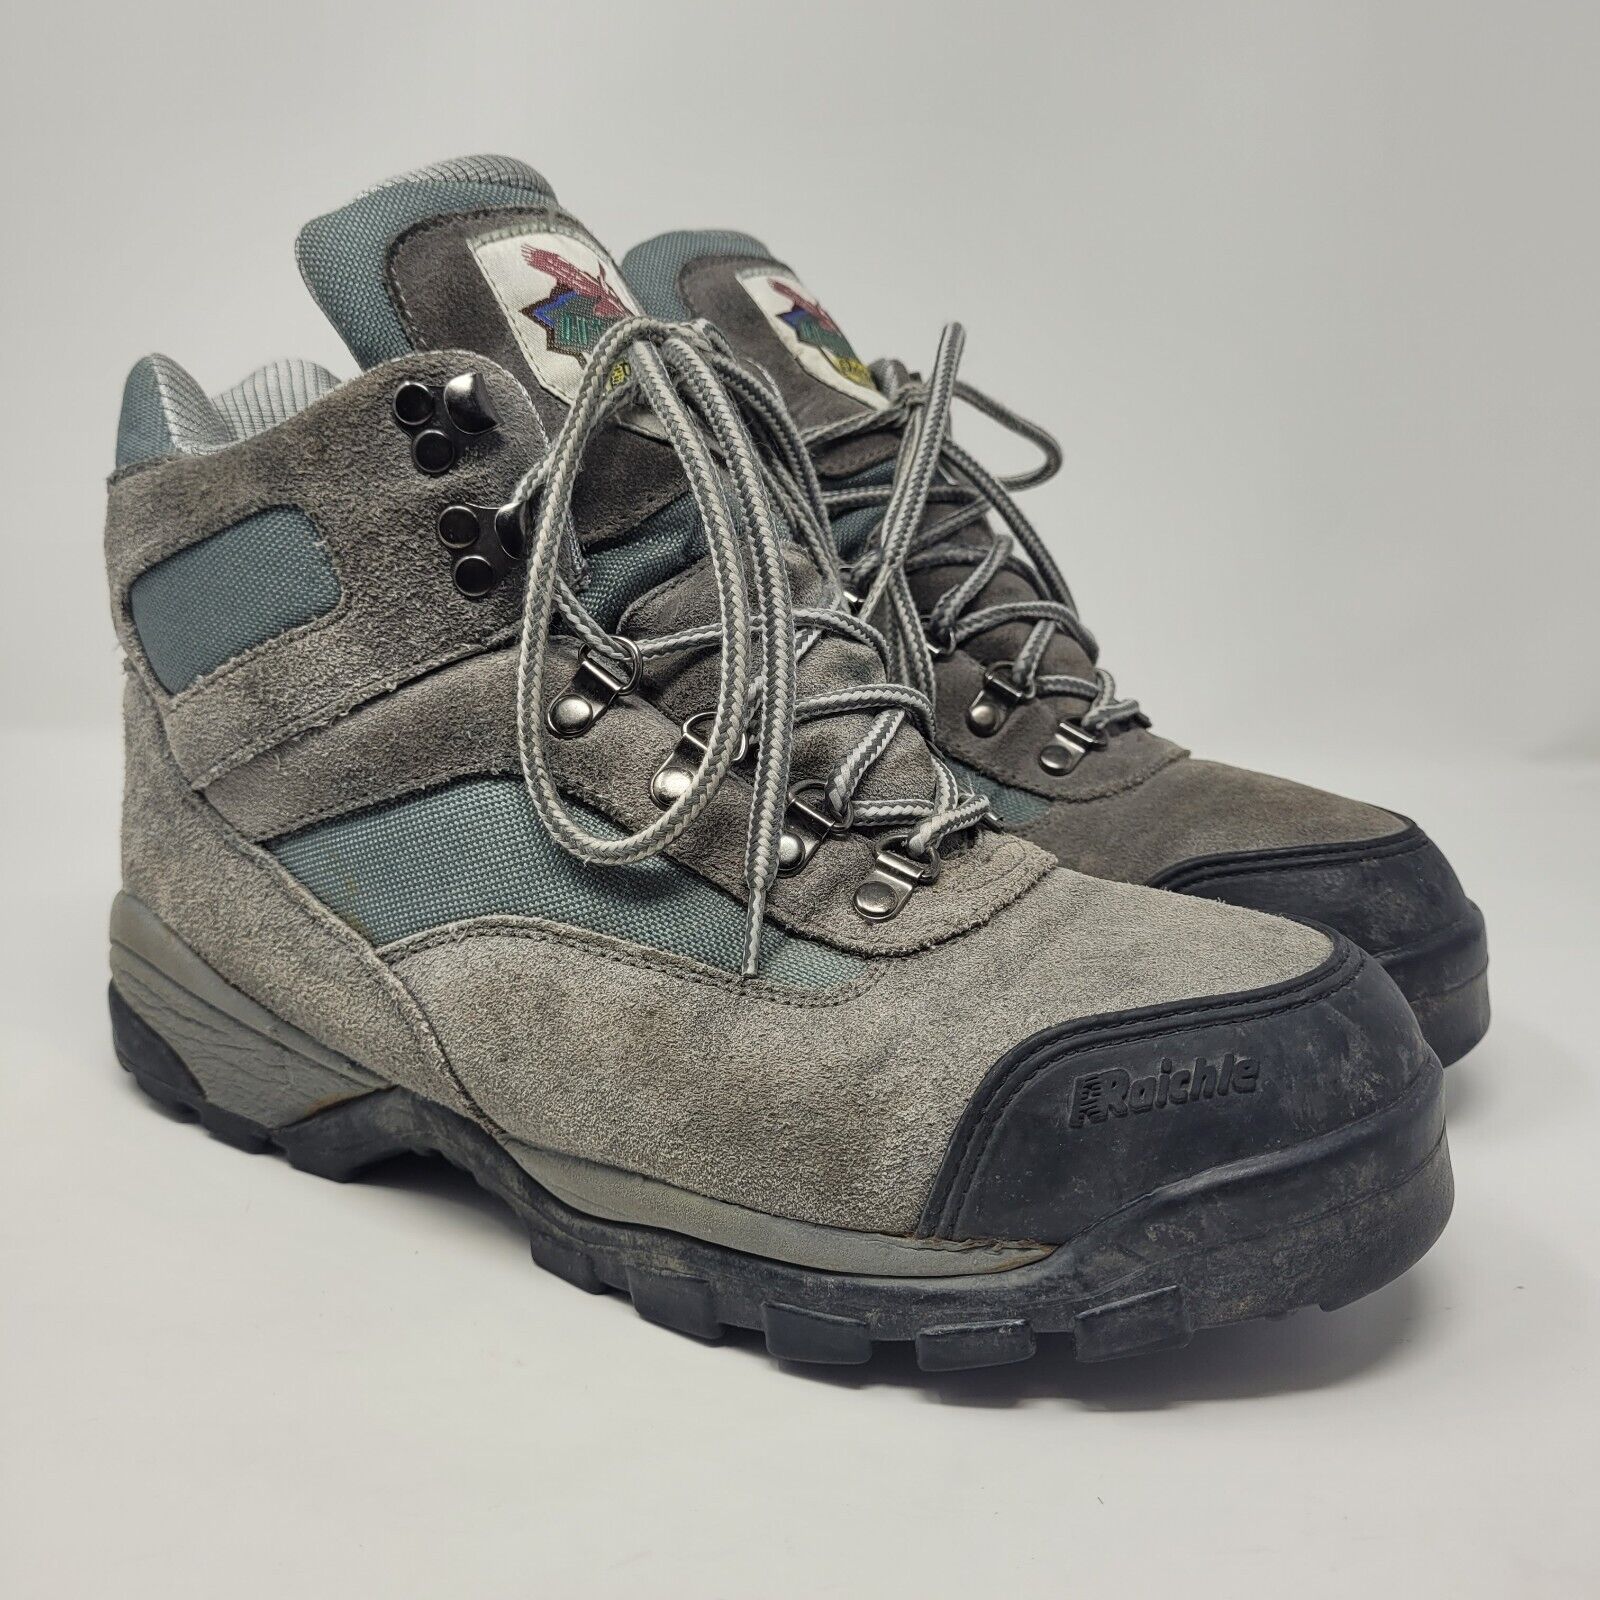 Raichle Boots Mens 11 Gray Suede Leather Hiking Outdoor Mountaineering Trail VTG